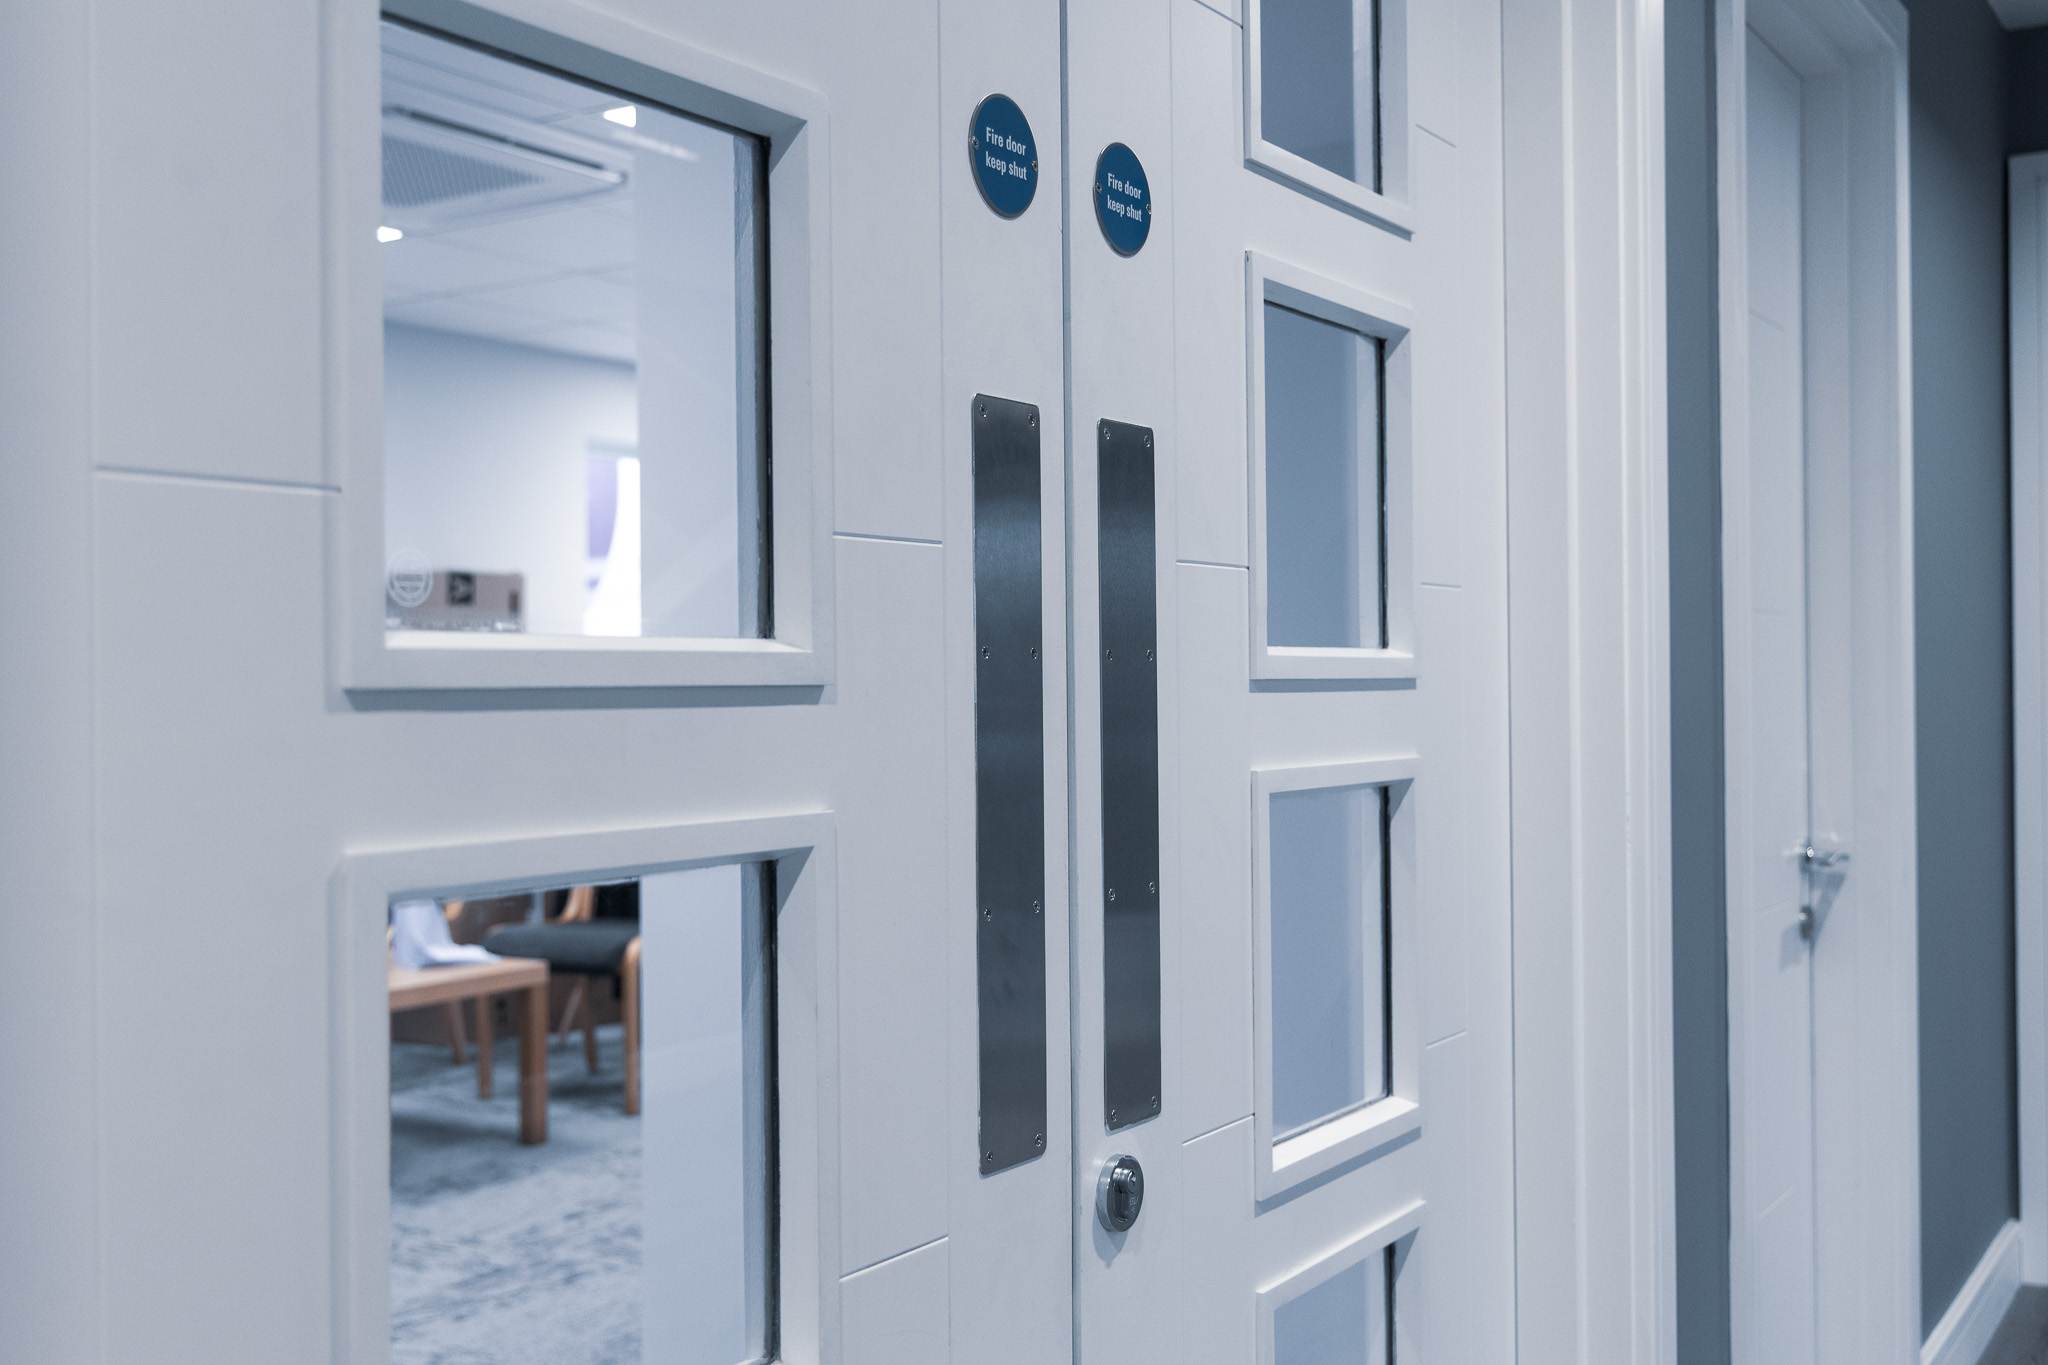 5 Crucial Checks for Fire Door Safety in Your Commercial Business